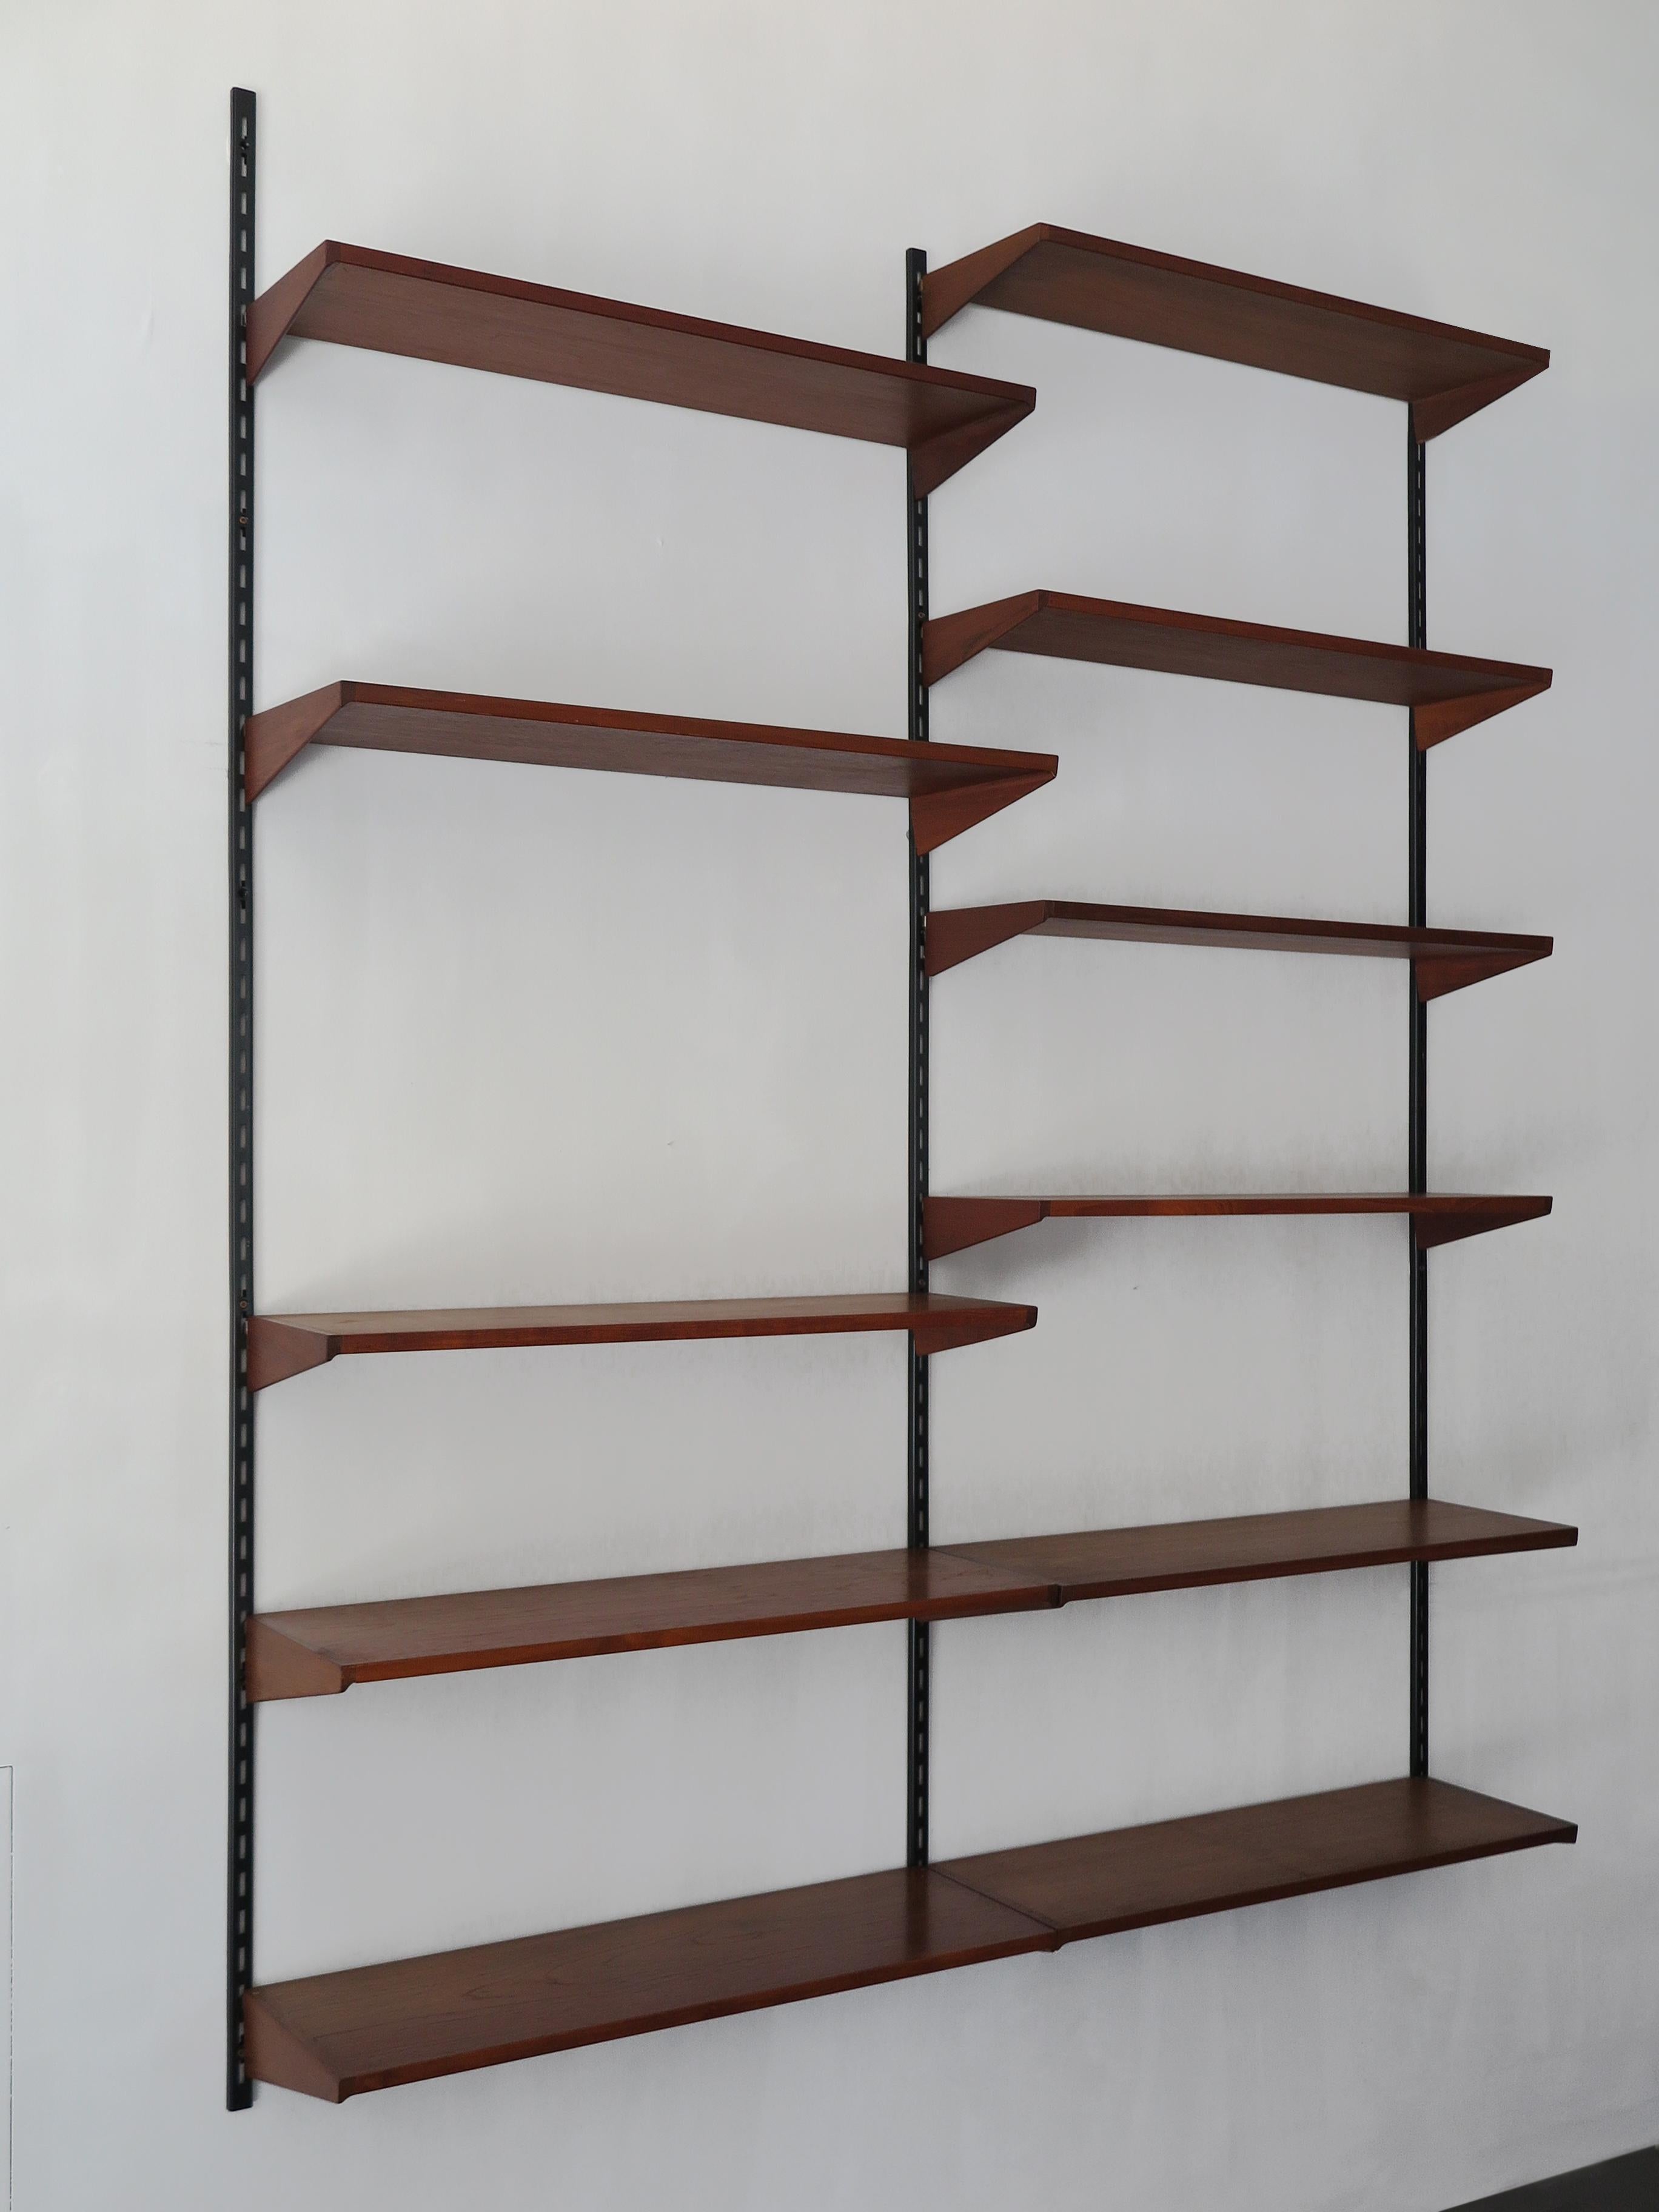 Danish teak shelving system designed by Kai Kristiansen for FM Mobler, shelves can be positioned as desired, circa 1960.
Please note that the item is original of the period and this shows normal signs of age and use.